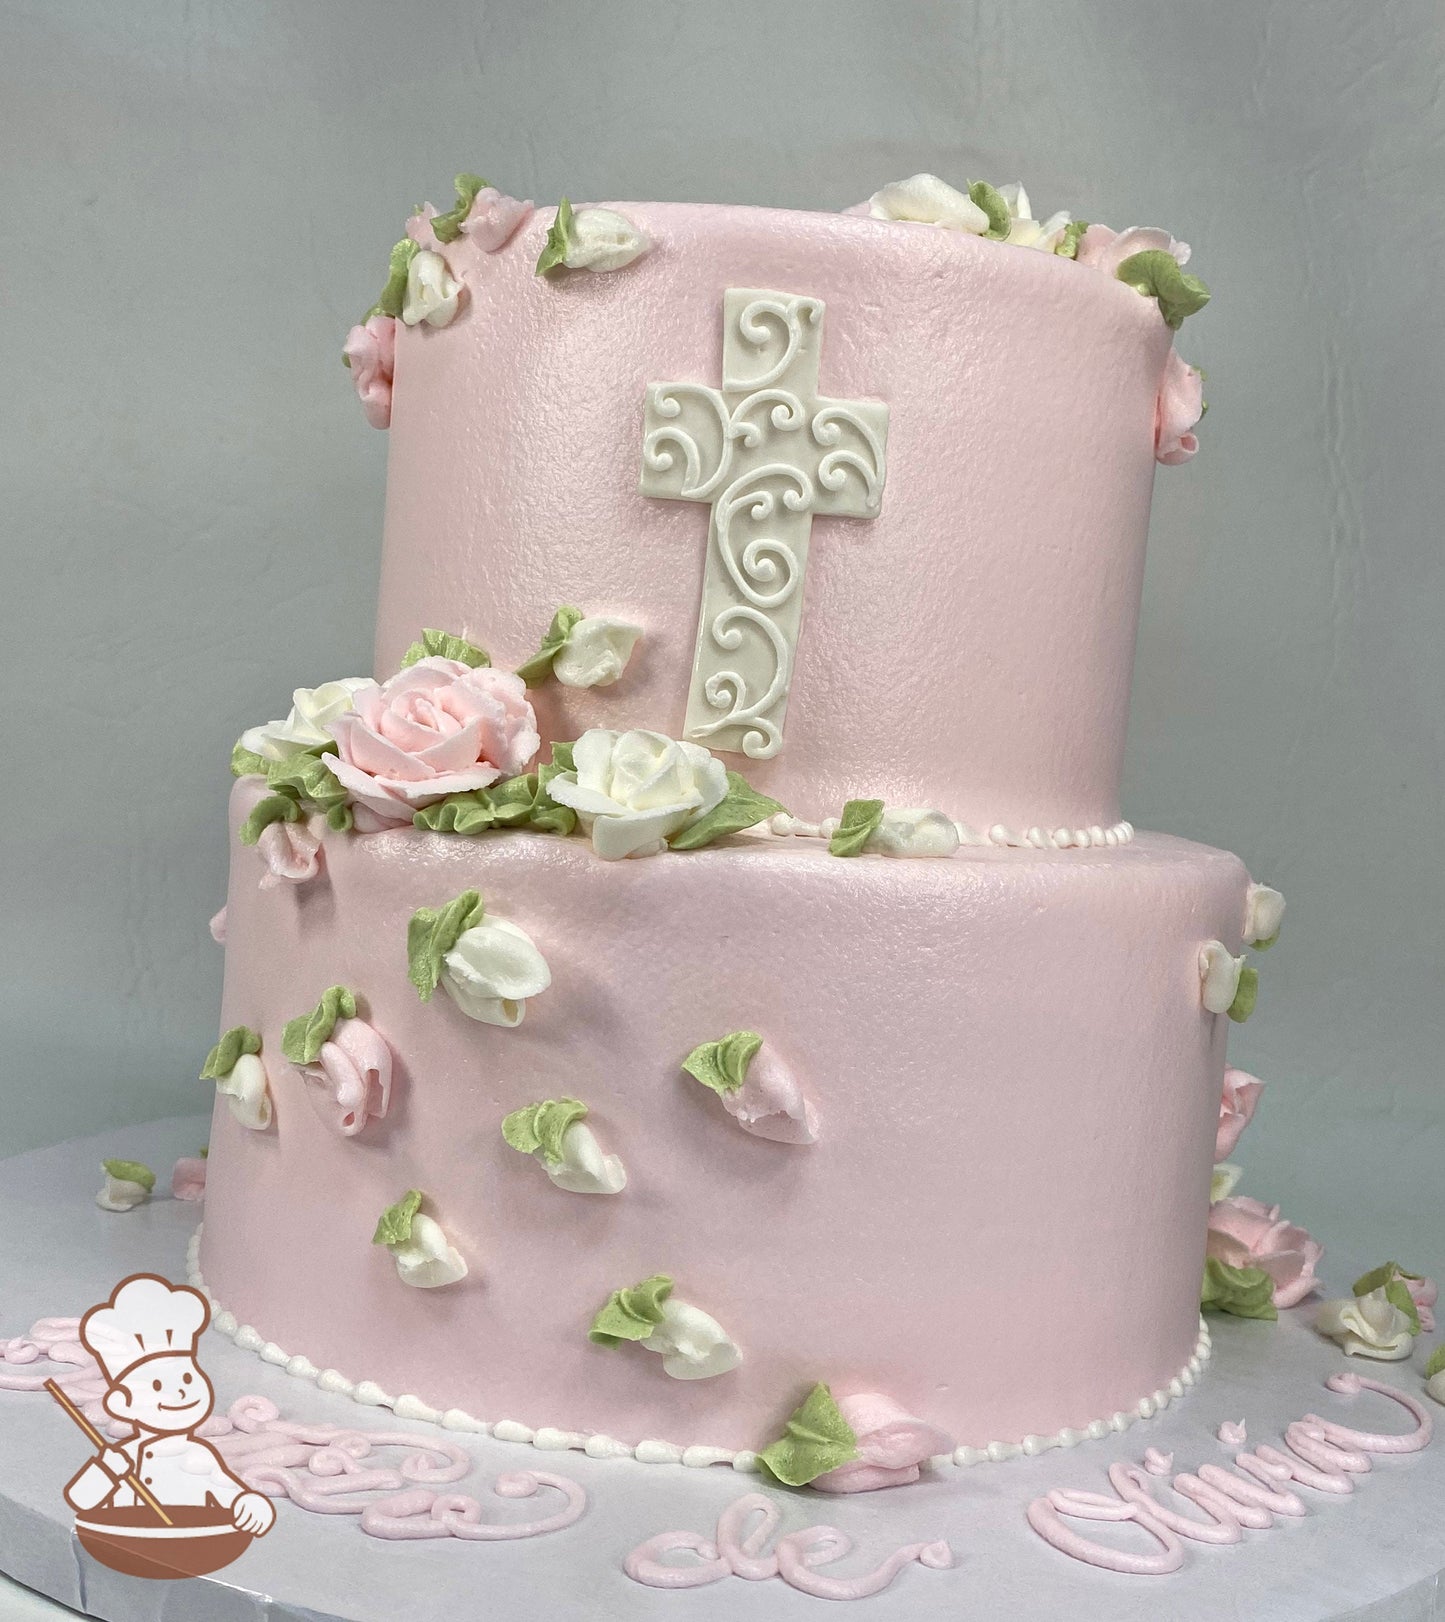 2-tier round cake with smooth light pink icing and buttercream roses in light pink and white colors and a white fondant cross on the cake wall.